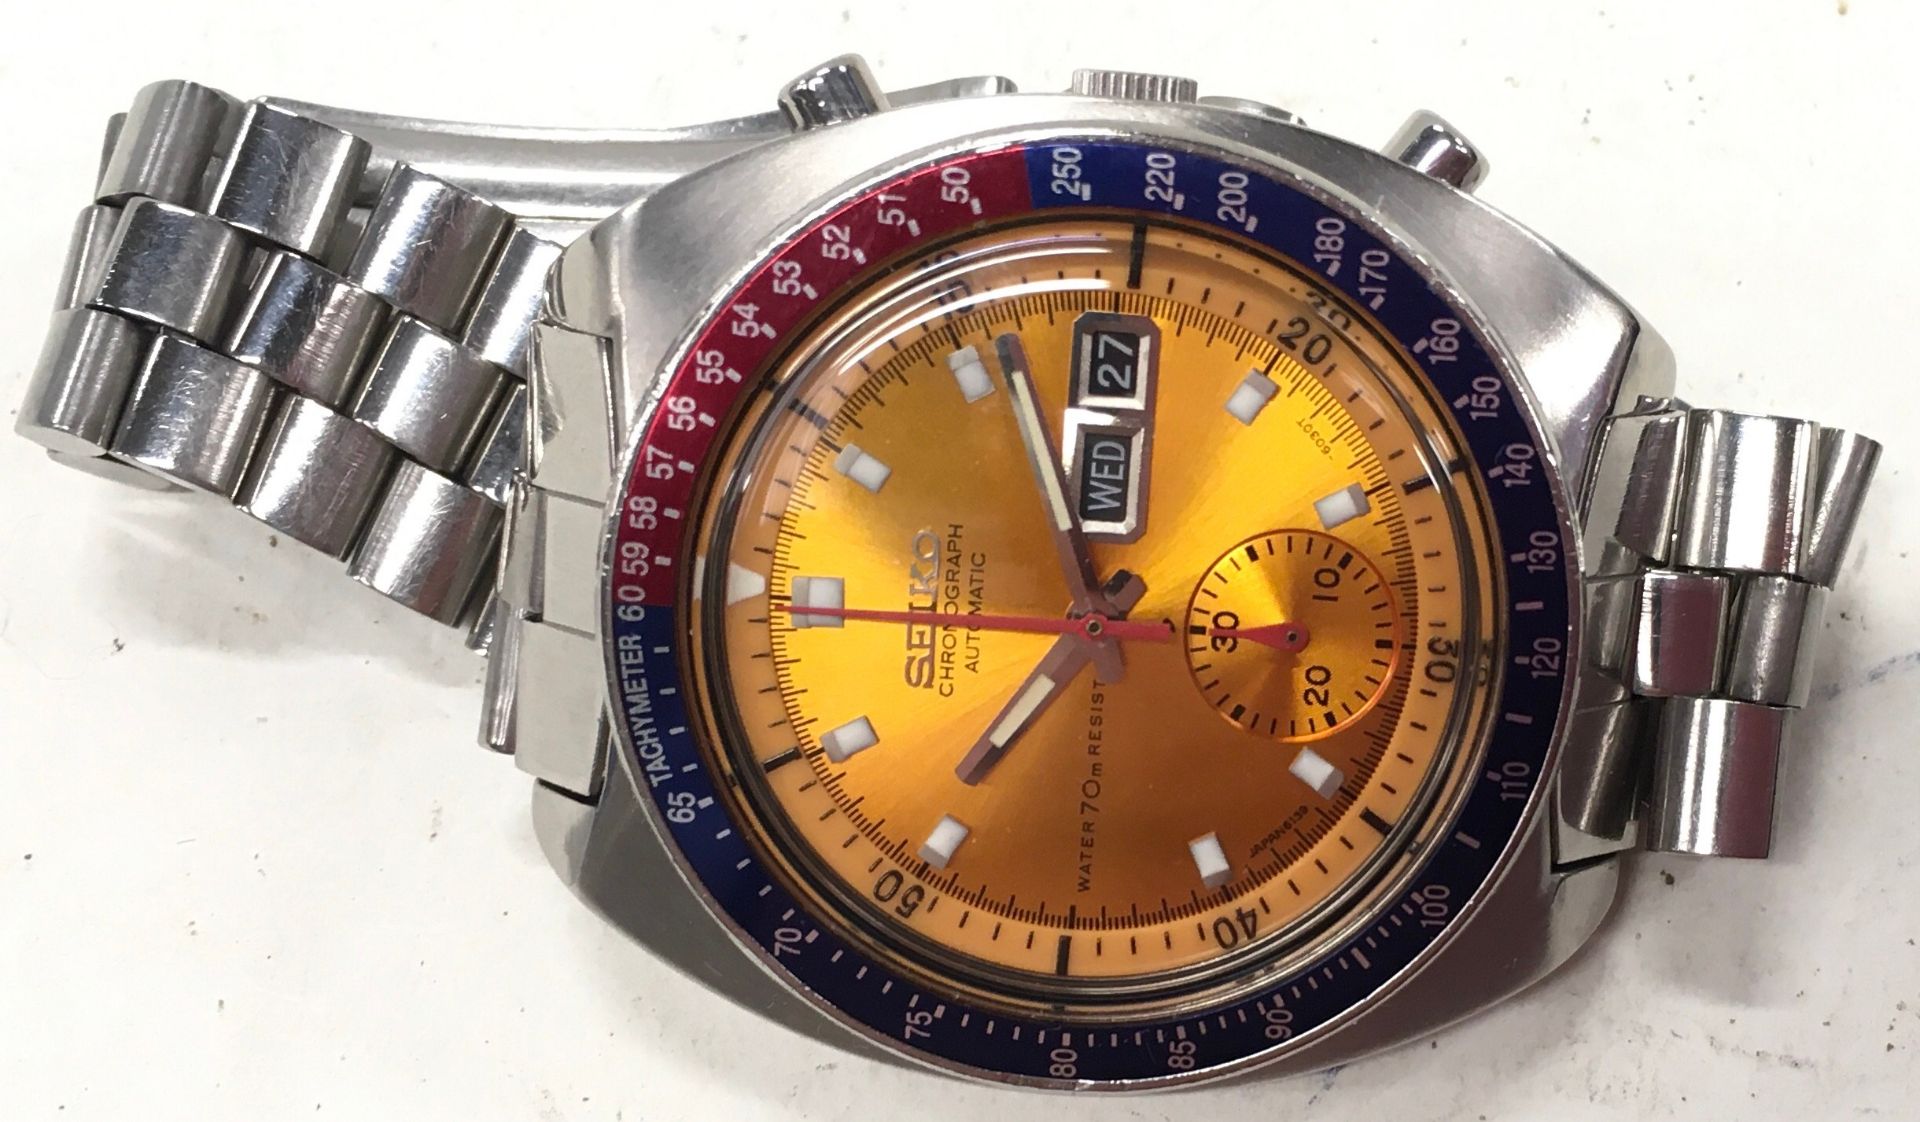 Collectible Seiko 6139-6002 'Pogue' automatic chronograph. Fully working, chronograph resets to zero - Image 2 of 4